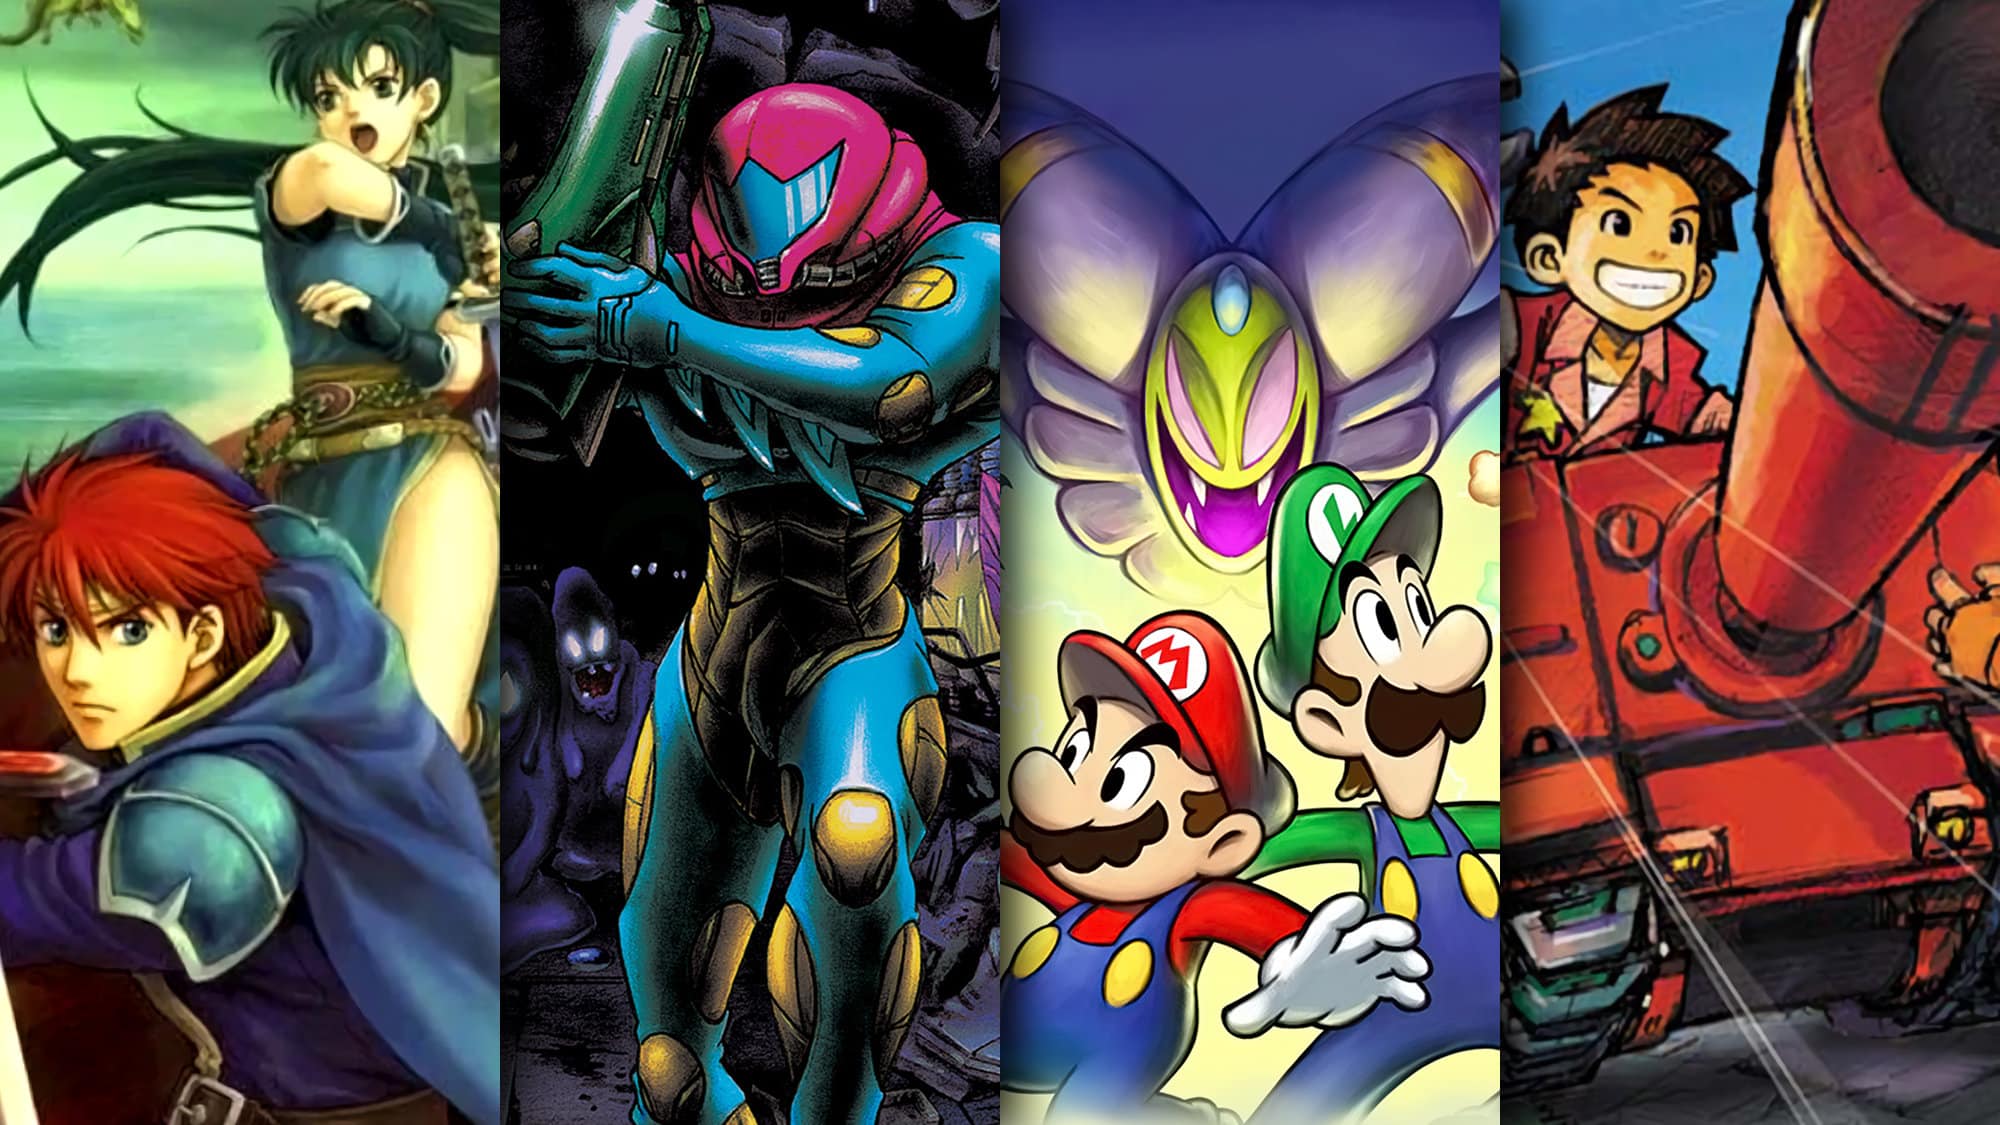 The 20 best Game Boy Advance games